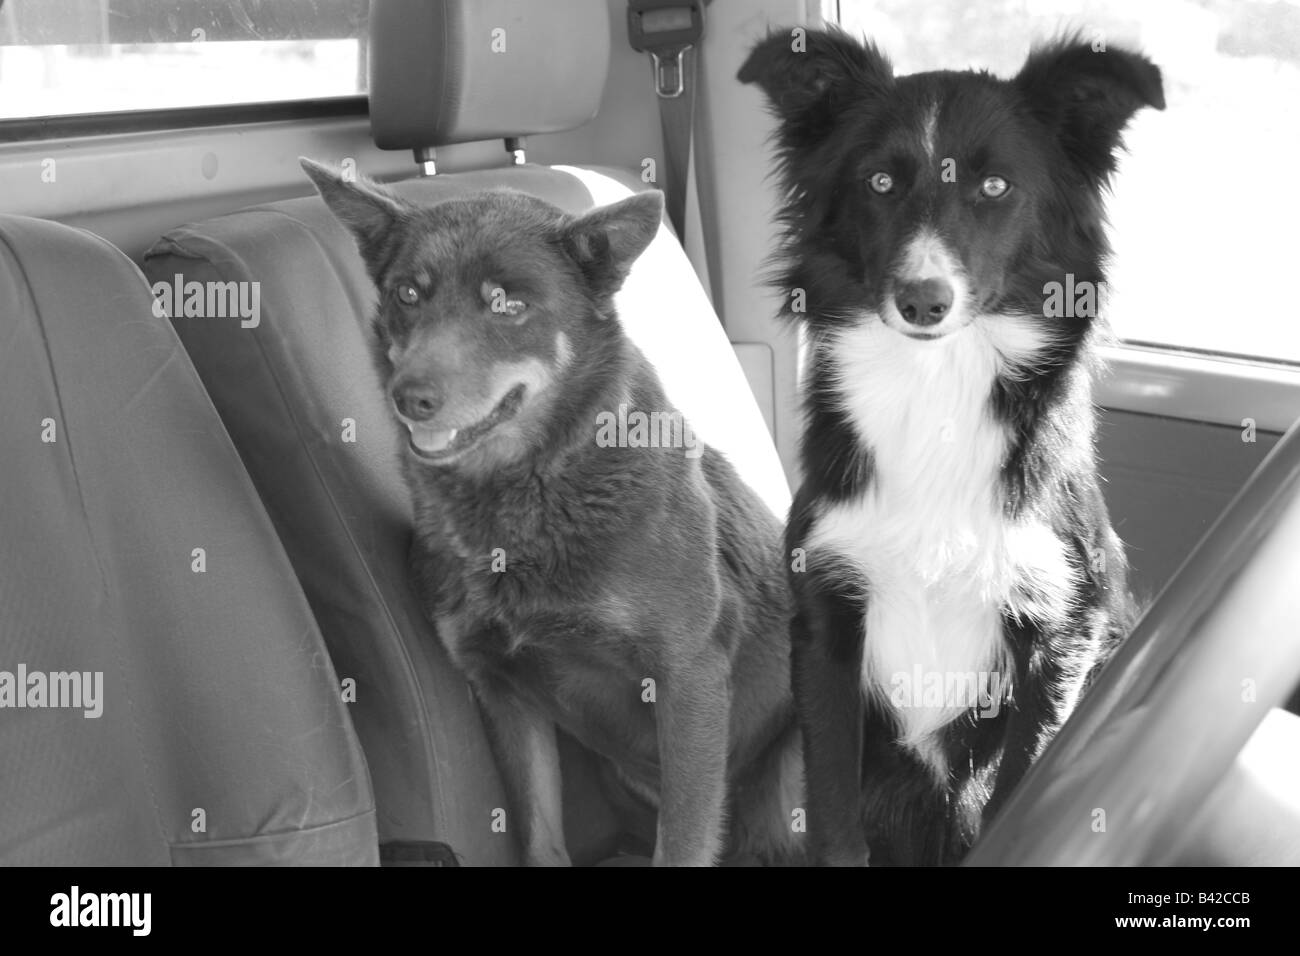 two dogs sitting inside a ute in outback australia Stock Photo